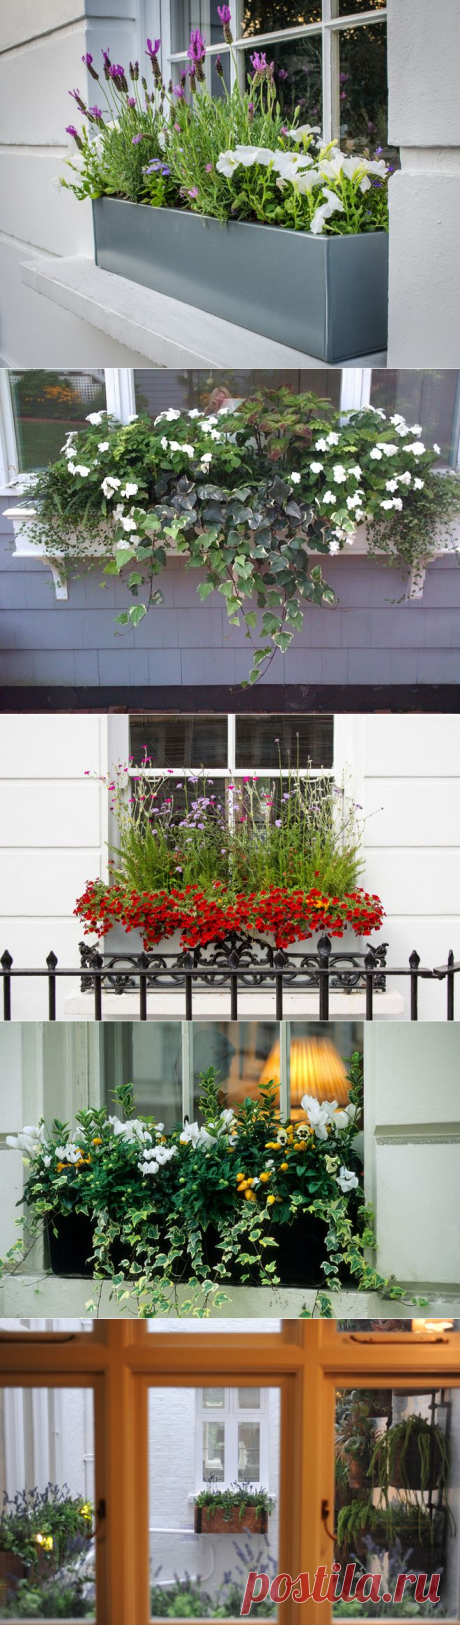 How to Plant a Beautiful, Thriving Window Box Garden